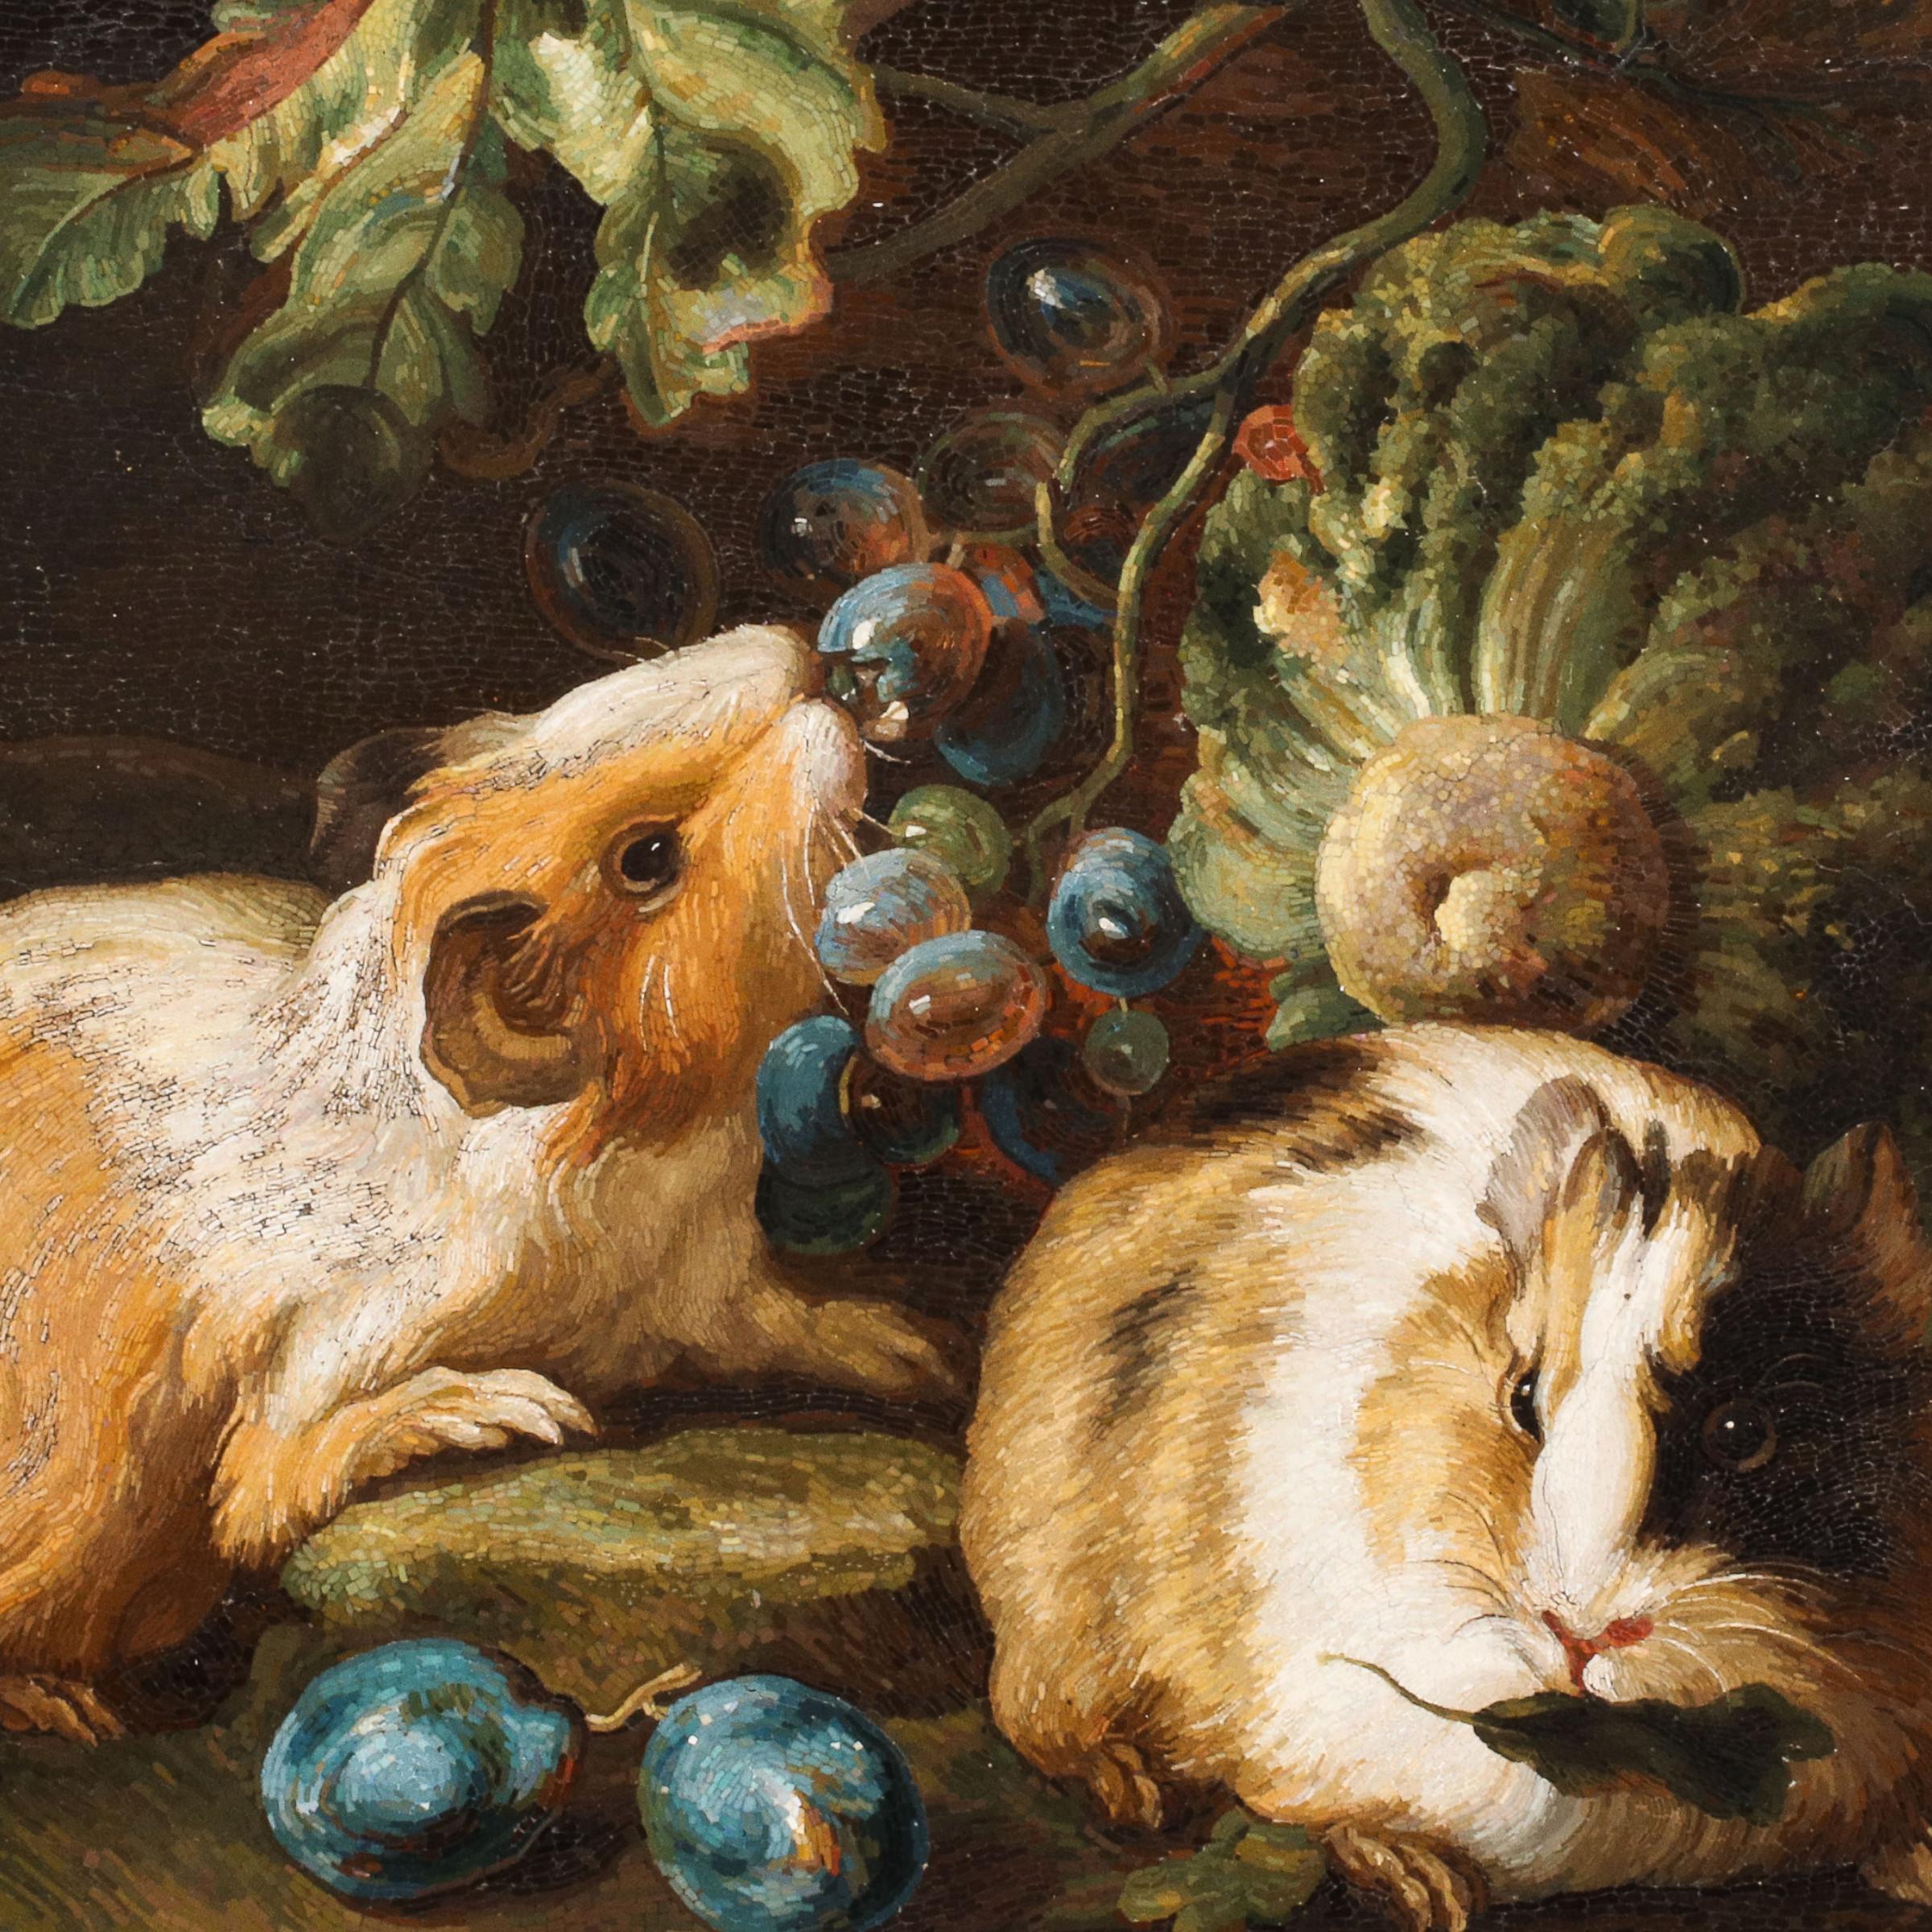 Stone Important Micromosaic of Two Guinea Pigs Eating Cabbage and Grapes